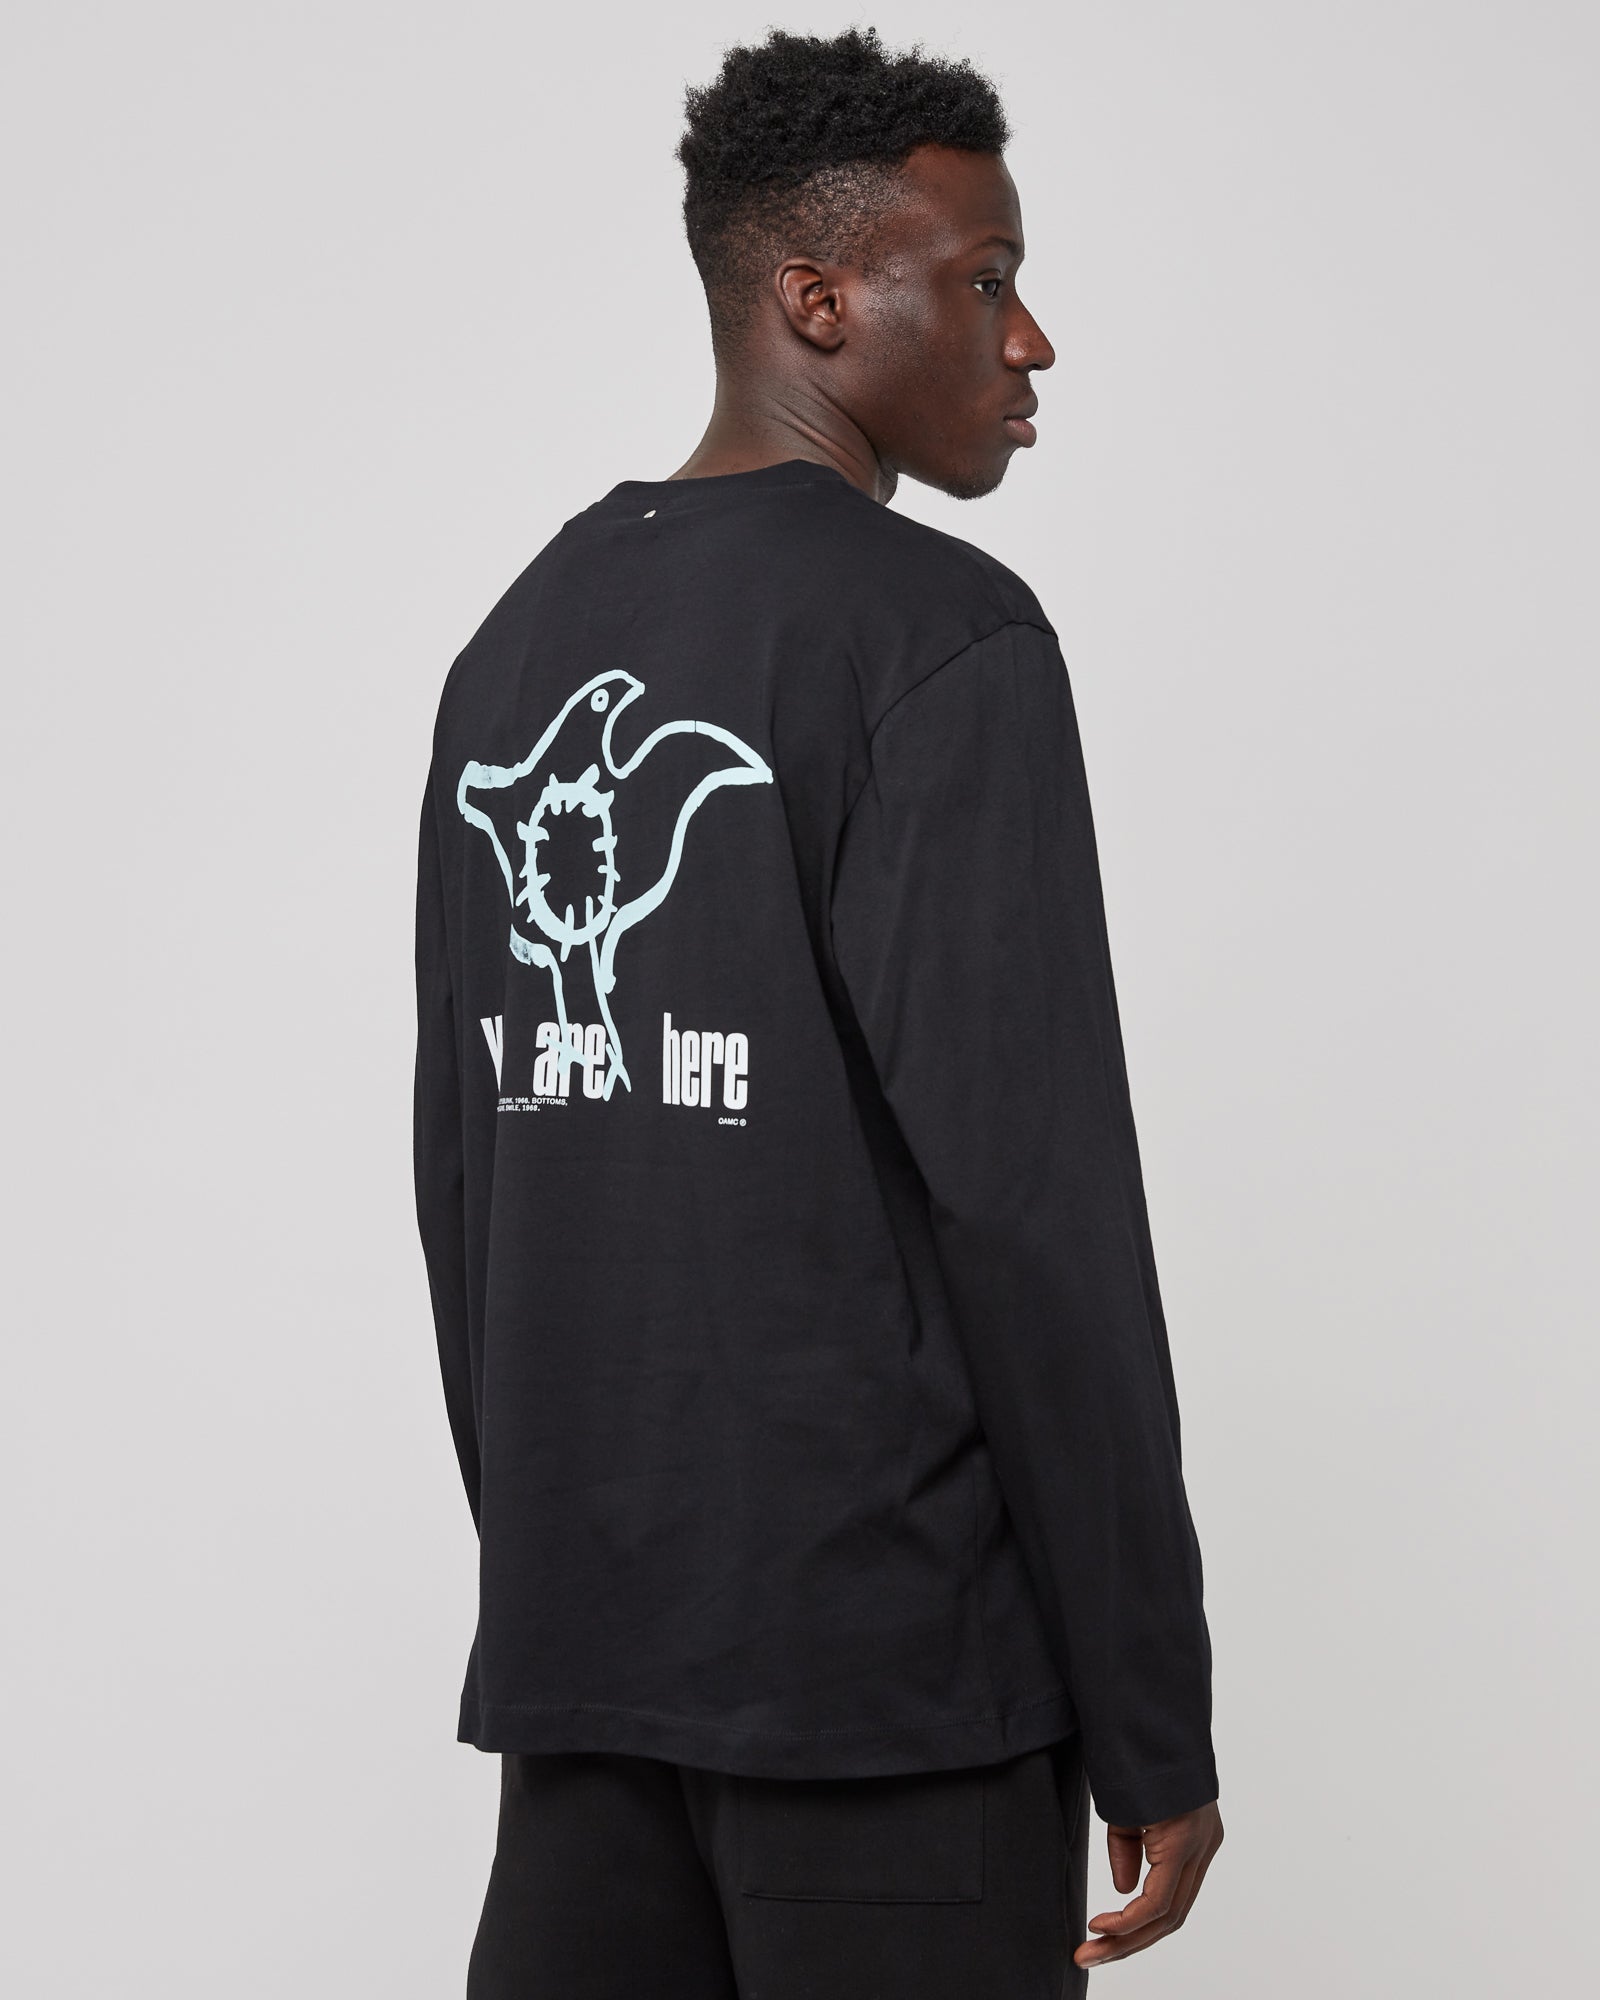 Roden Gray You Are Here L/S T-Shirt in Black